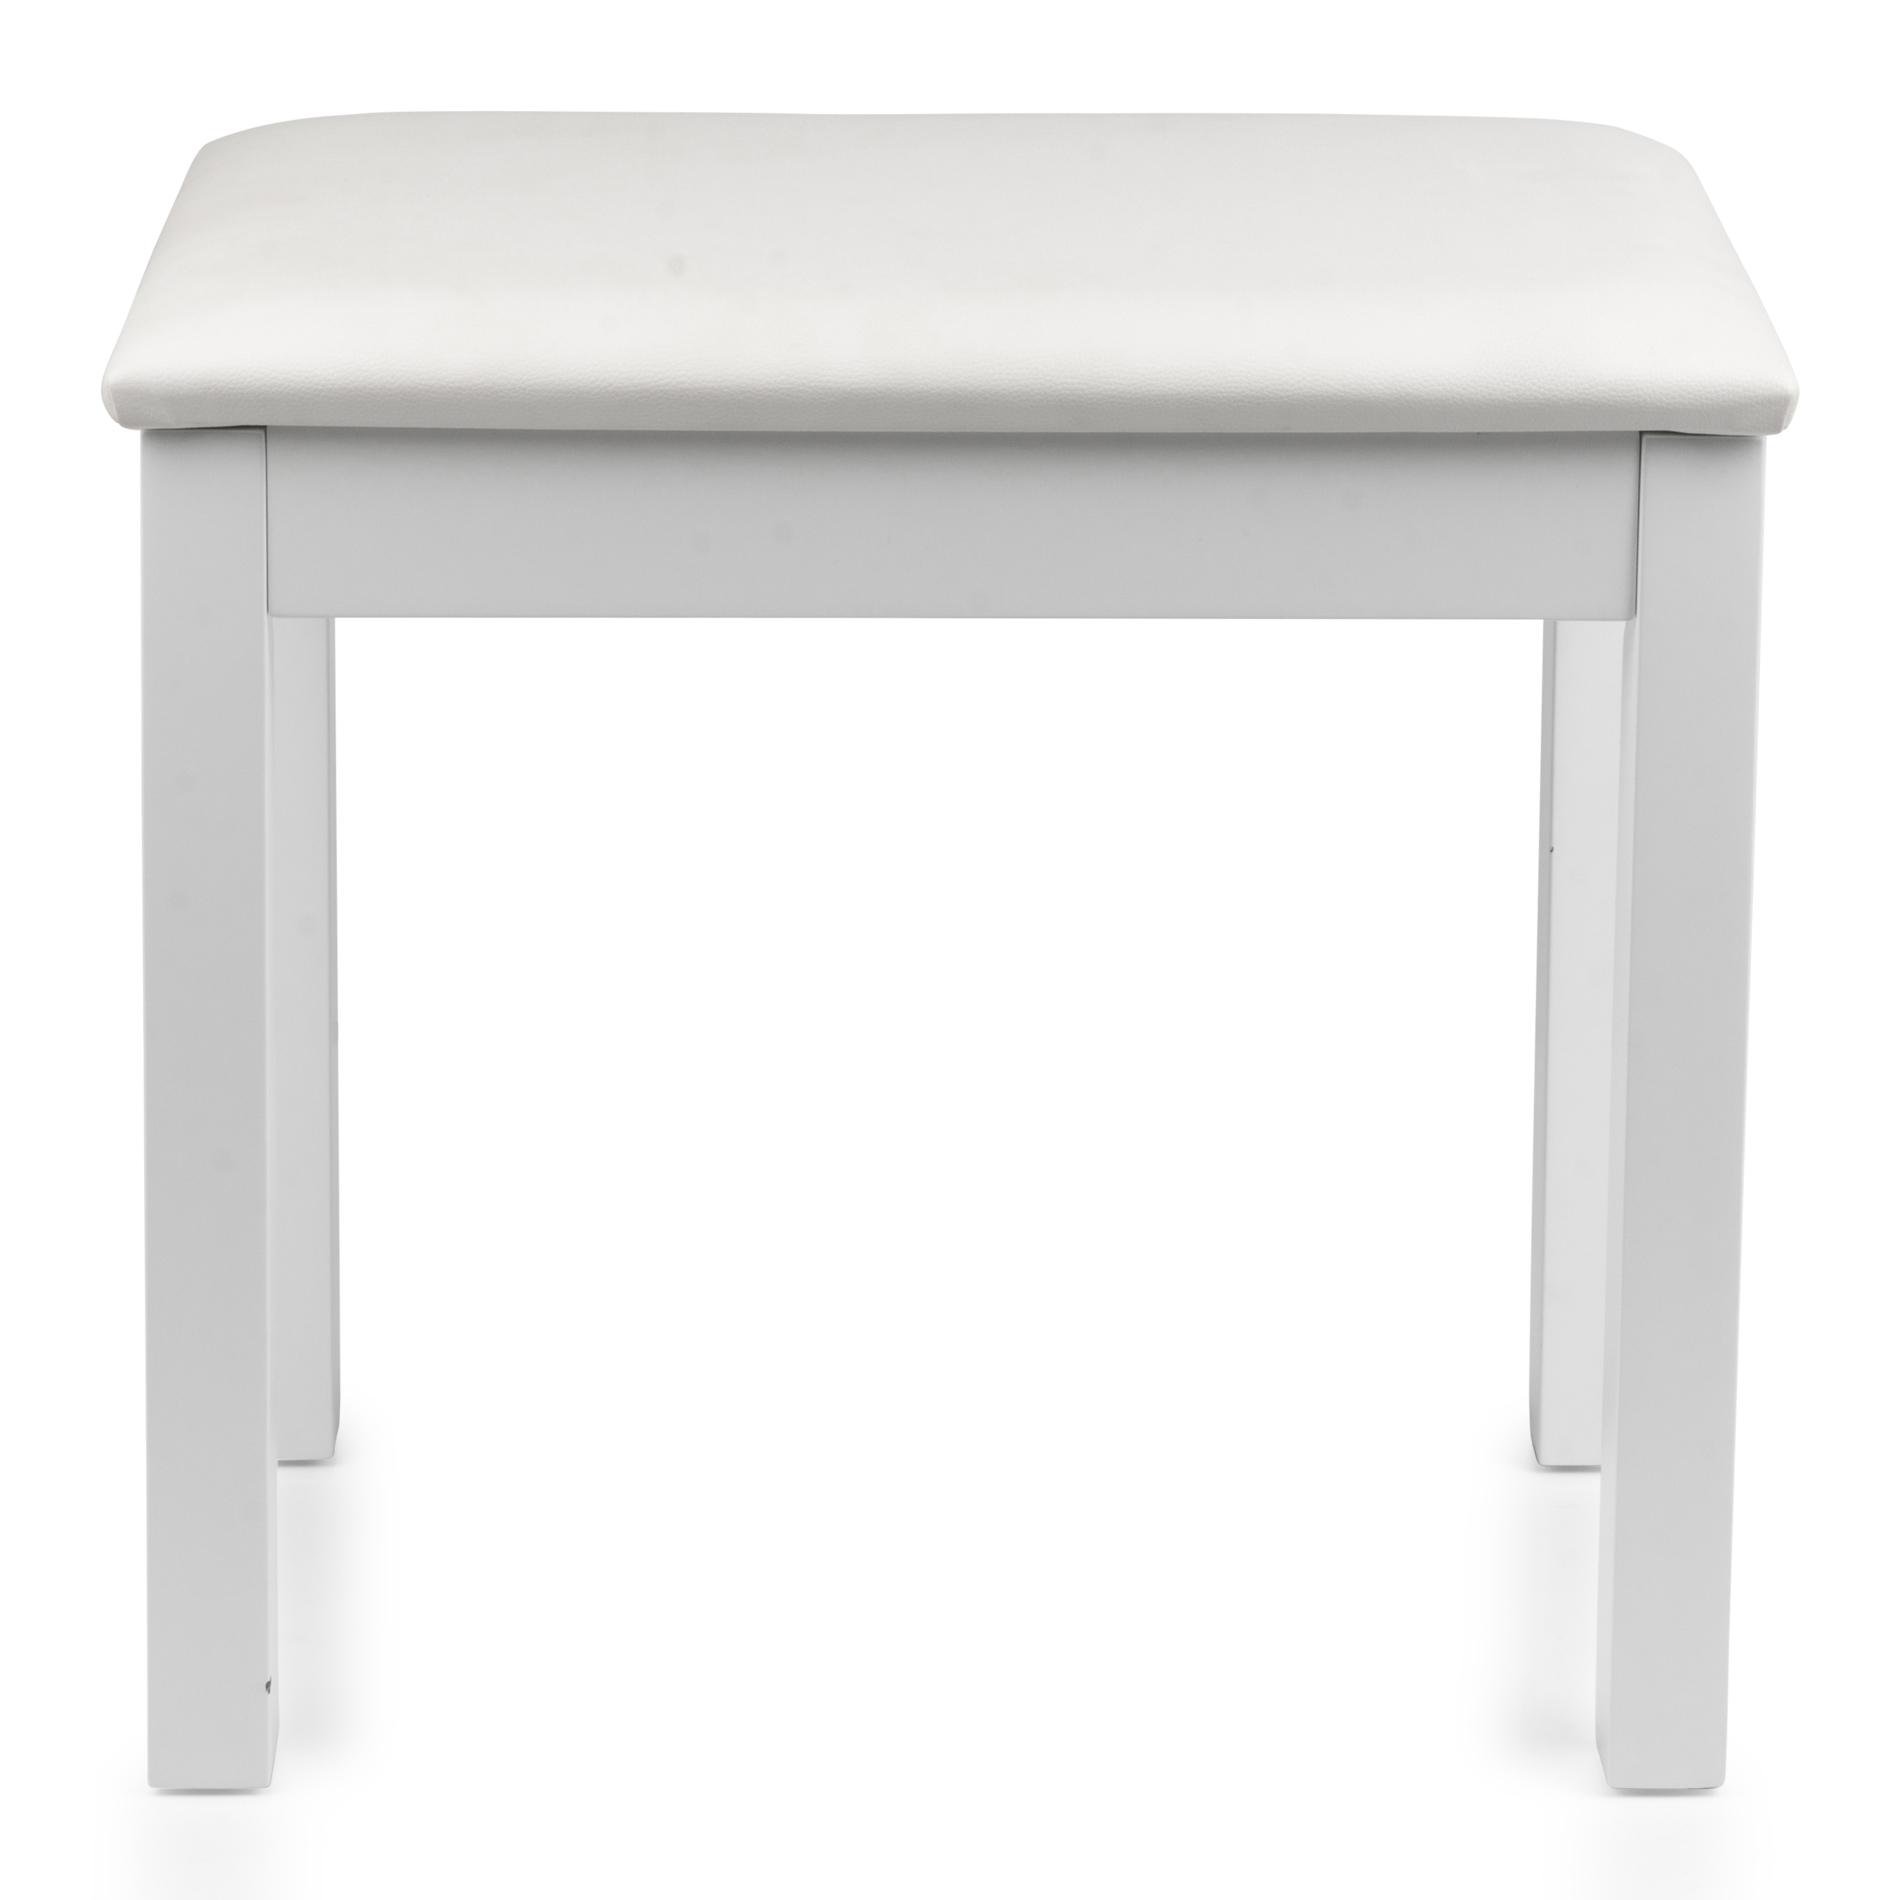 Traditional Wooden Piano Bench In White-GFW-KEYBENCH-WDWH